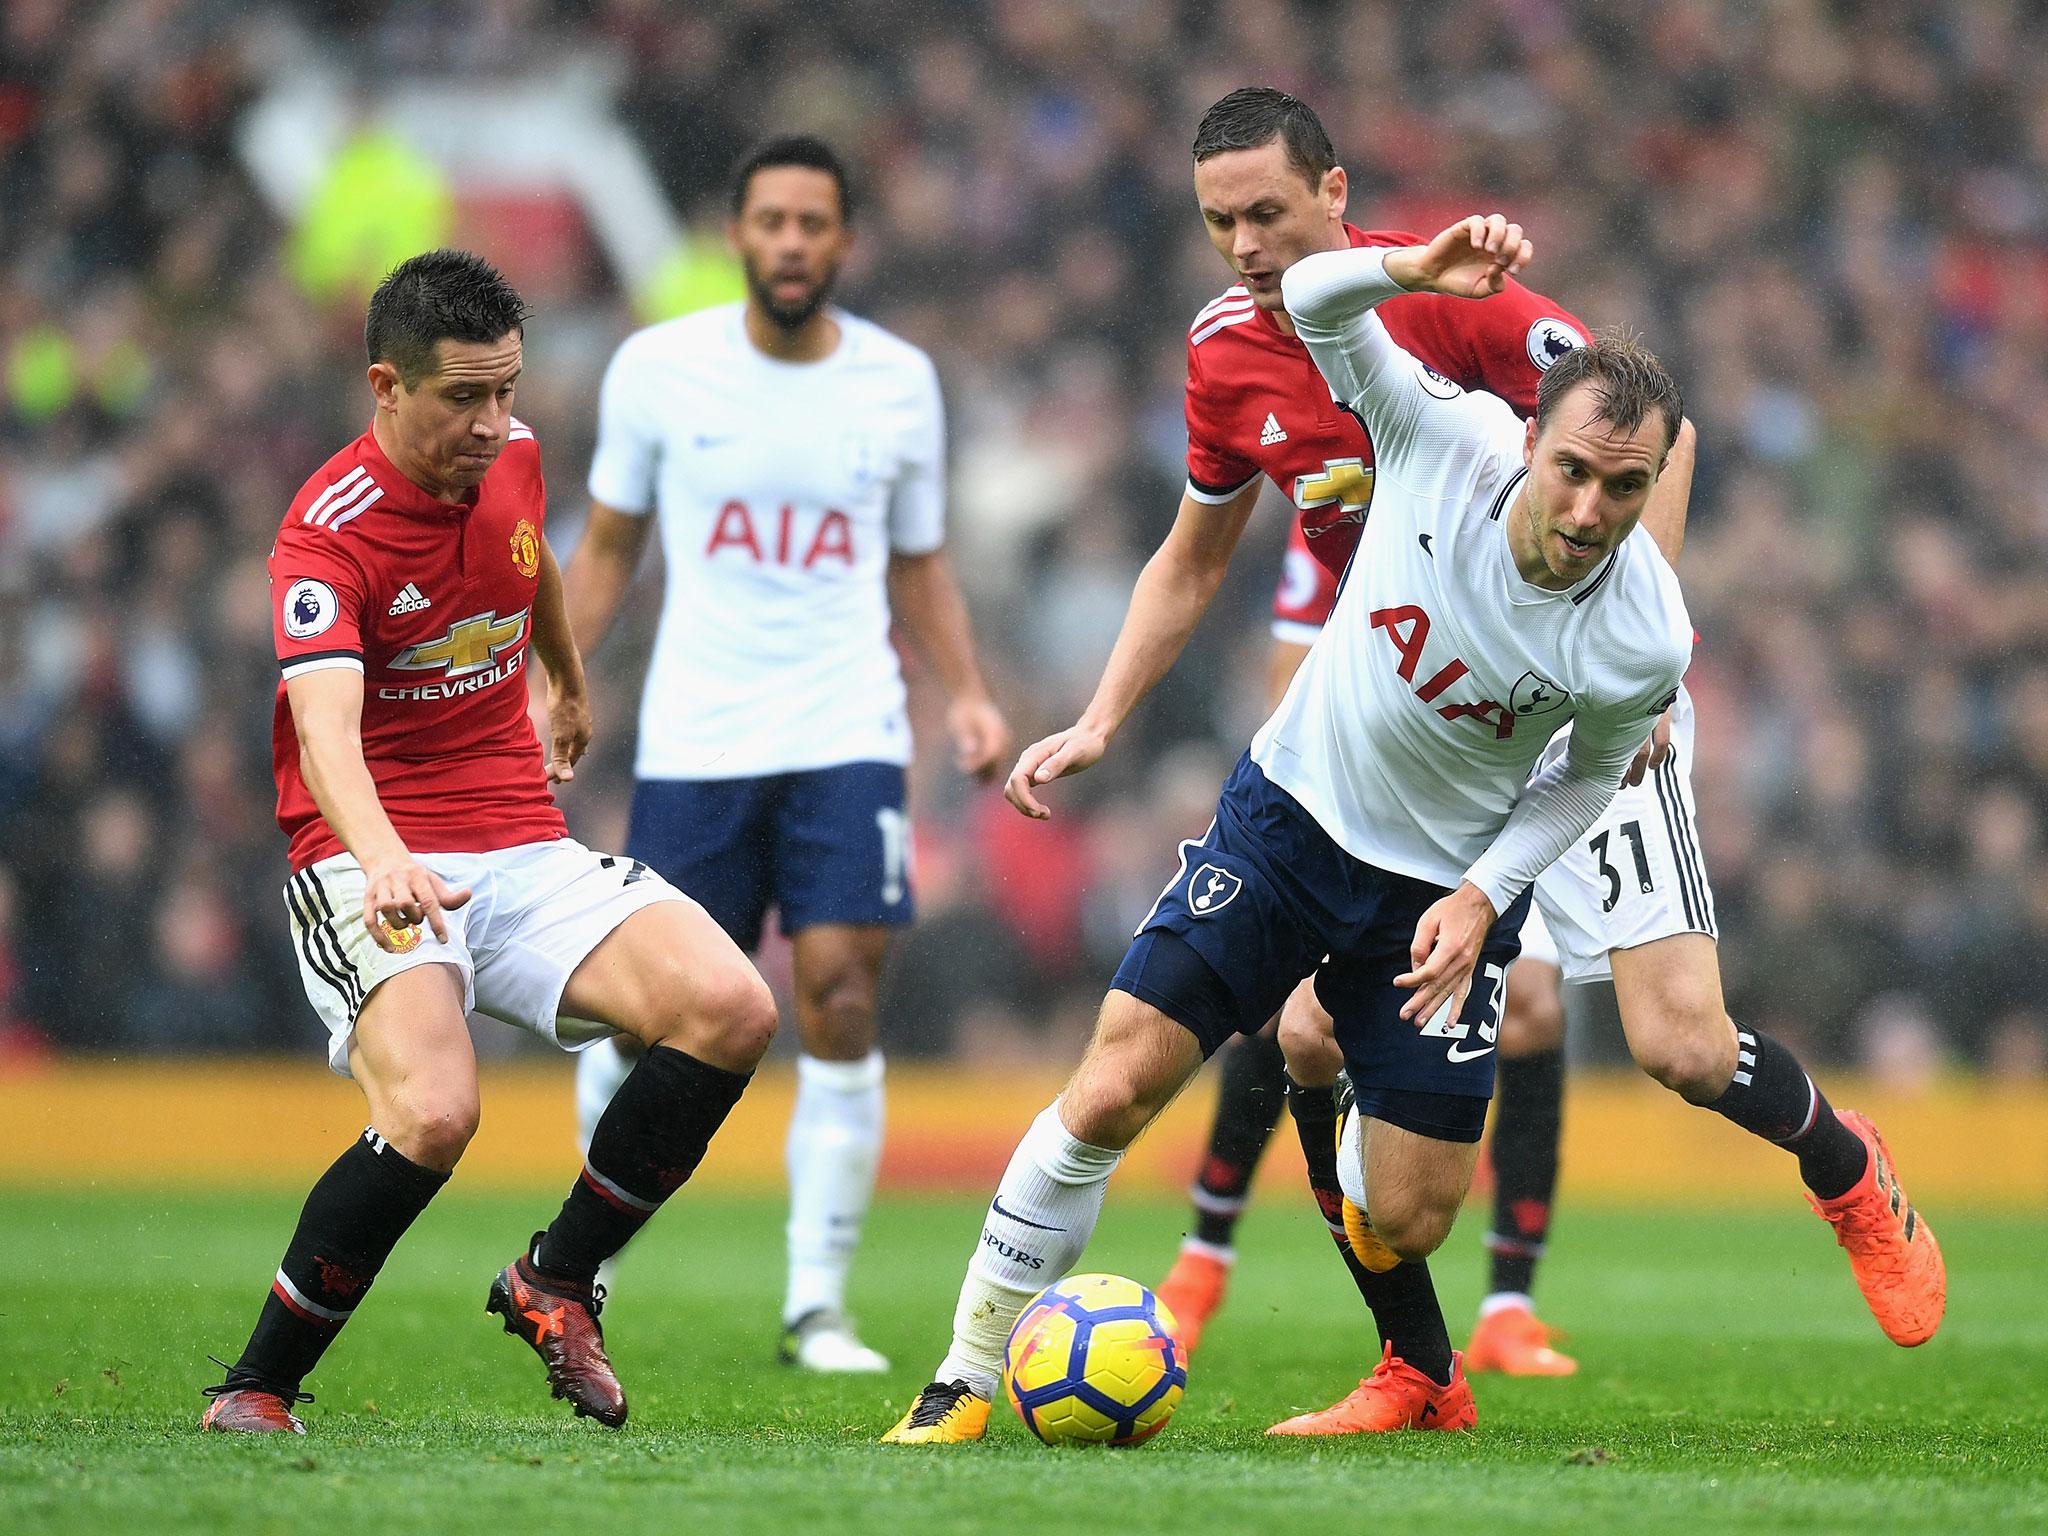 Manchester United vs Tottenham: Three key battles to look out for during the FA Cup semi-final